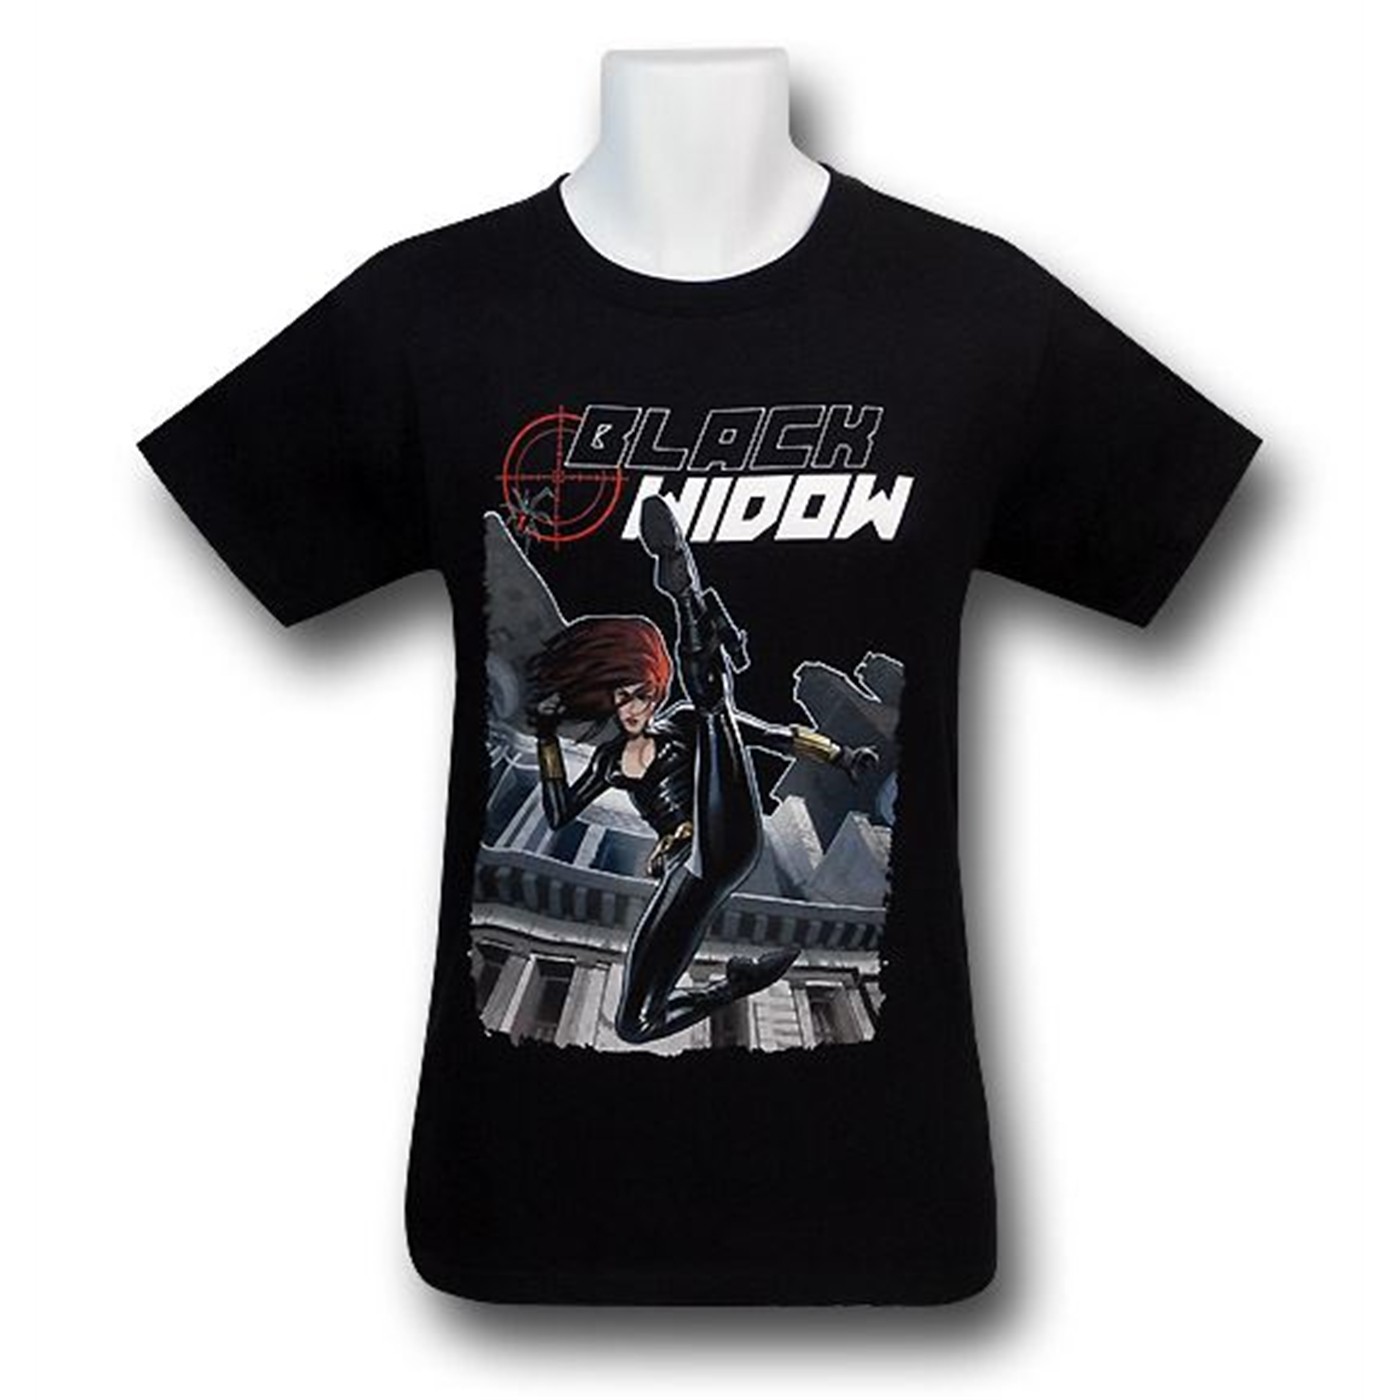 Black Widow "Look What I Can Do" T-Shirt